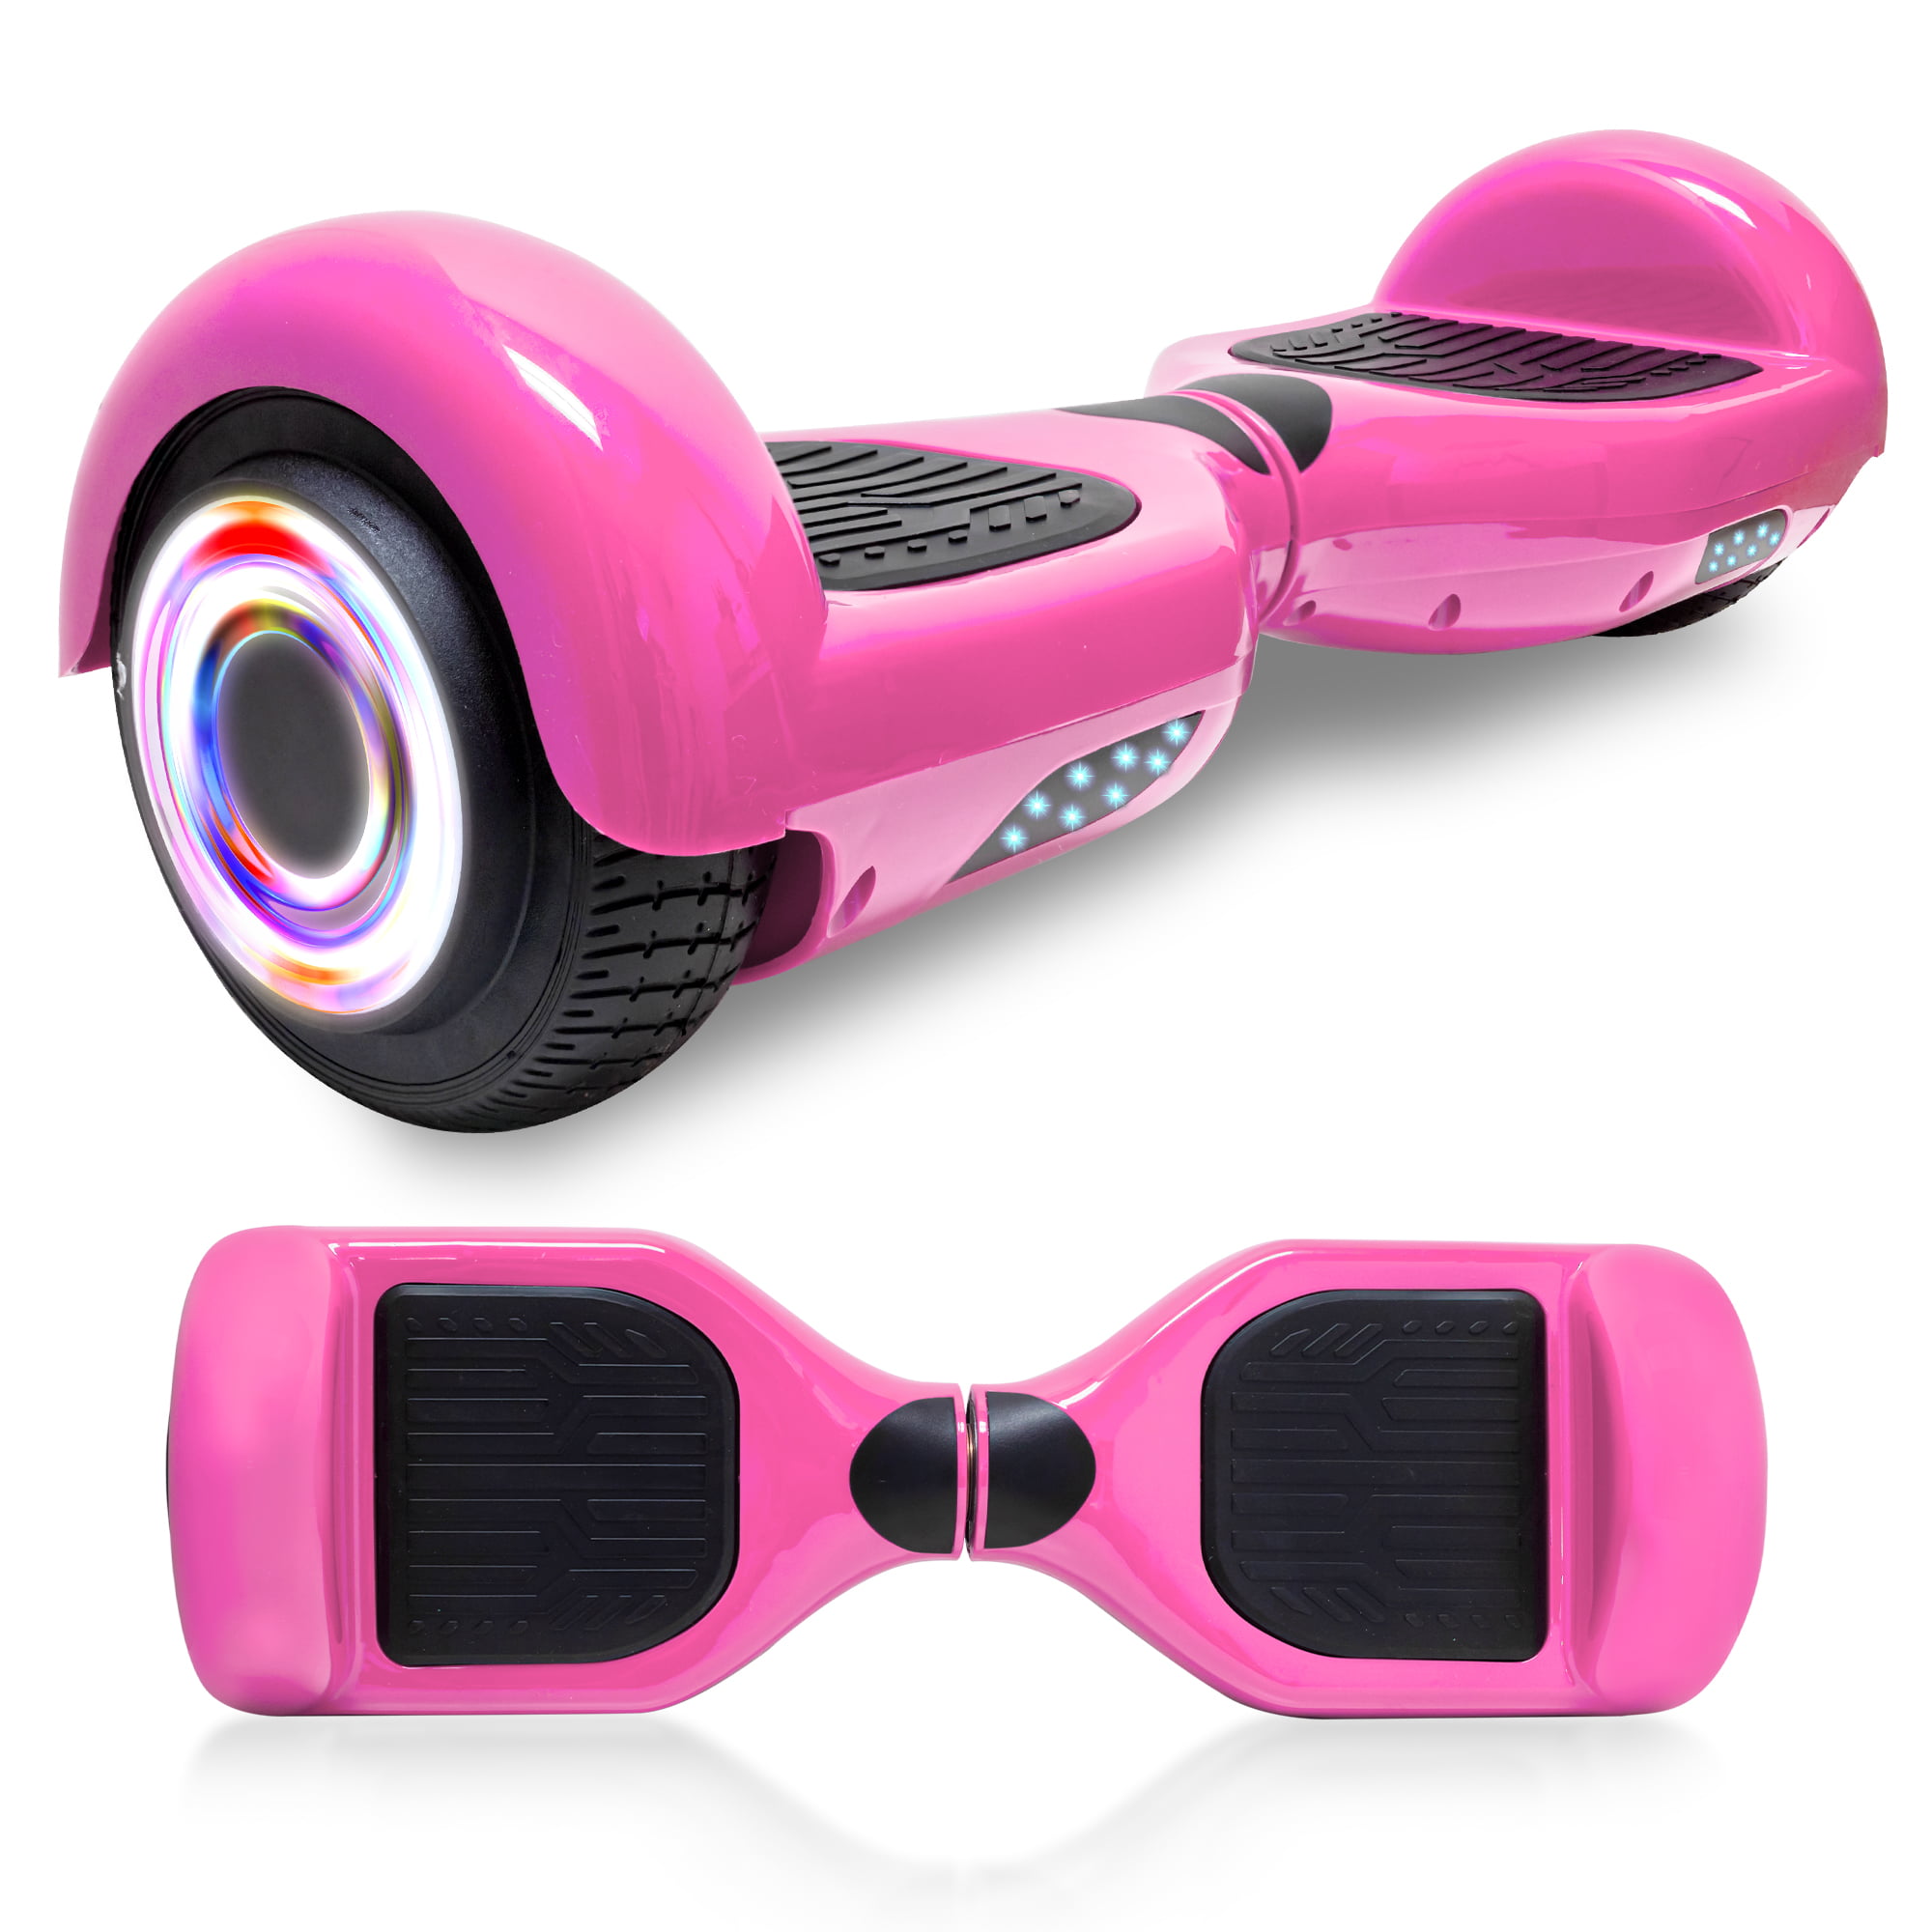 NHT Hoverboard Electric Self Balancing Scooter Hover Board with Build in Hover Board LED Running Lights Safety Certified 